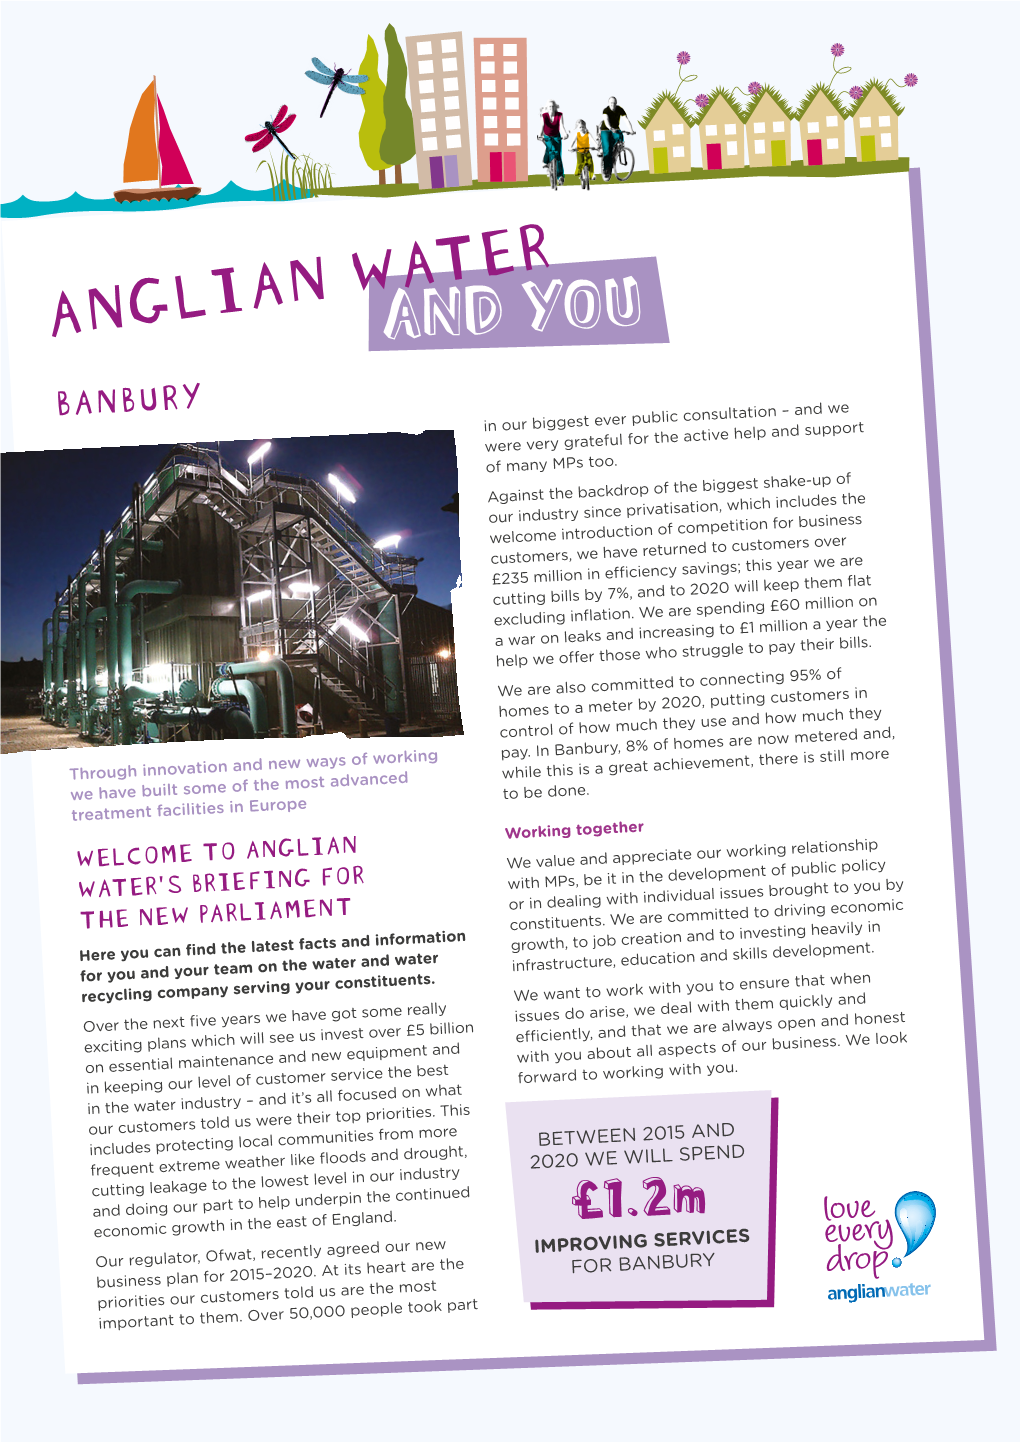 ANGLIAN WATERAND YOU BANBURY in Our Biggest Ever Public Consultation – and We Were Very Grateful for the Active Help and Support of Many Mps Too